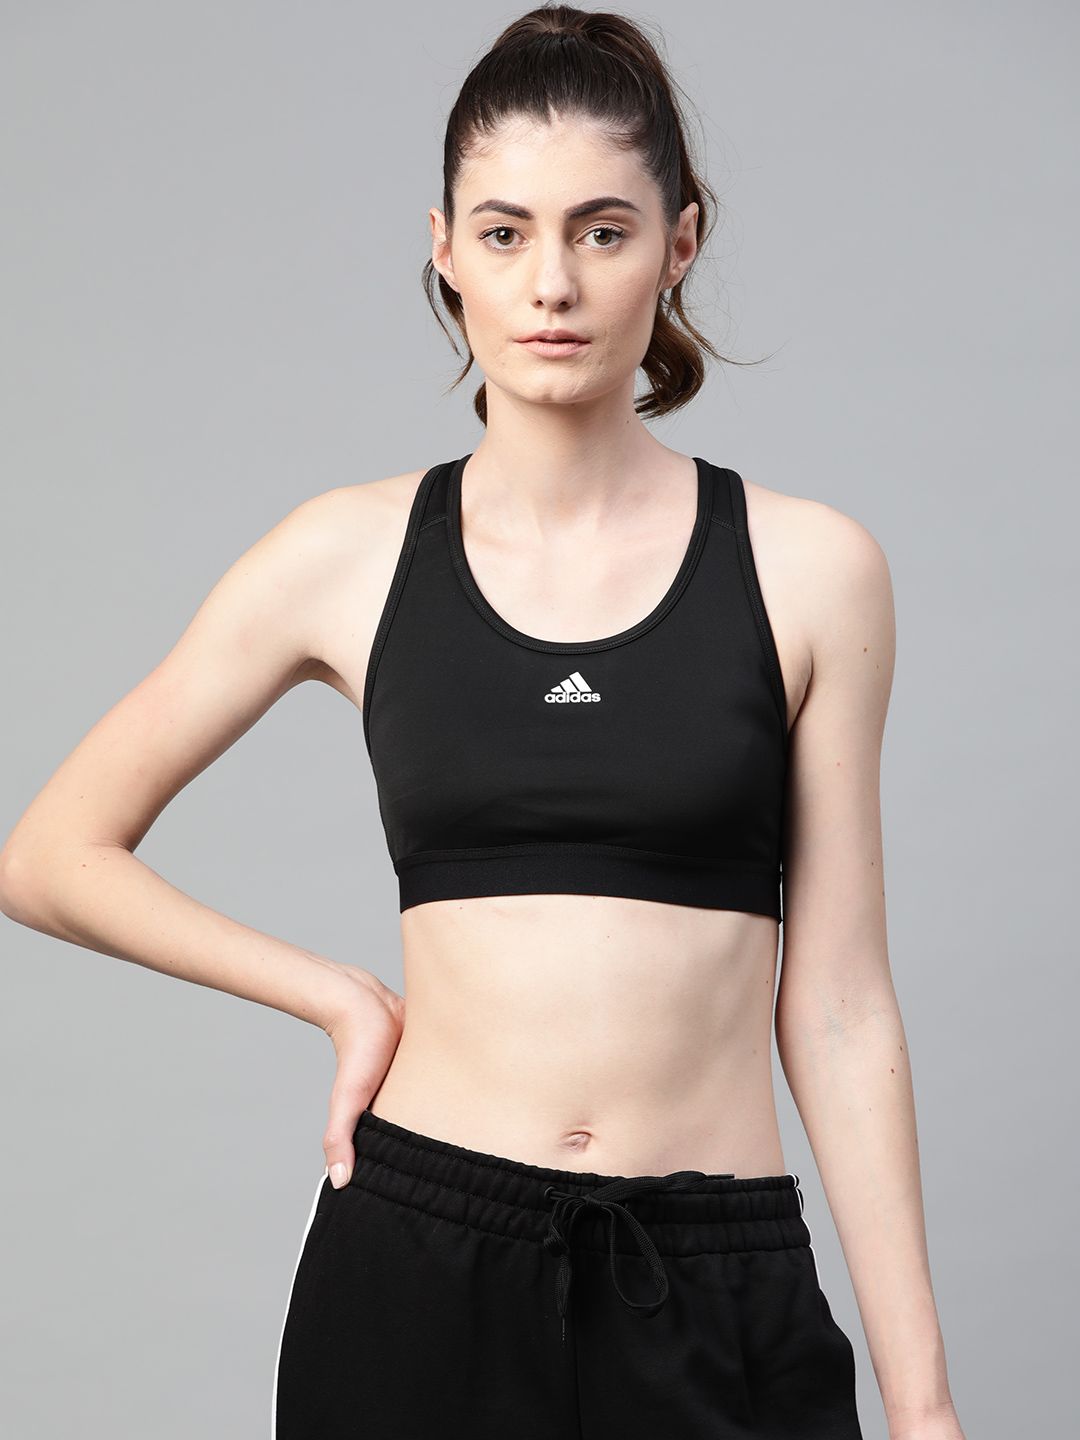 ADIDAS Women Black Solid BT Non-Wired Lightly Padded Aeroready Sustainable Workout Sustainable Bra Price in India